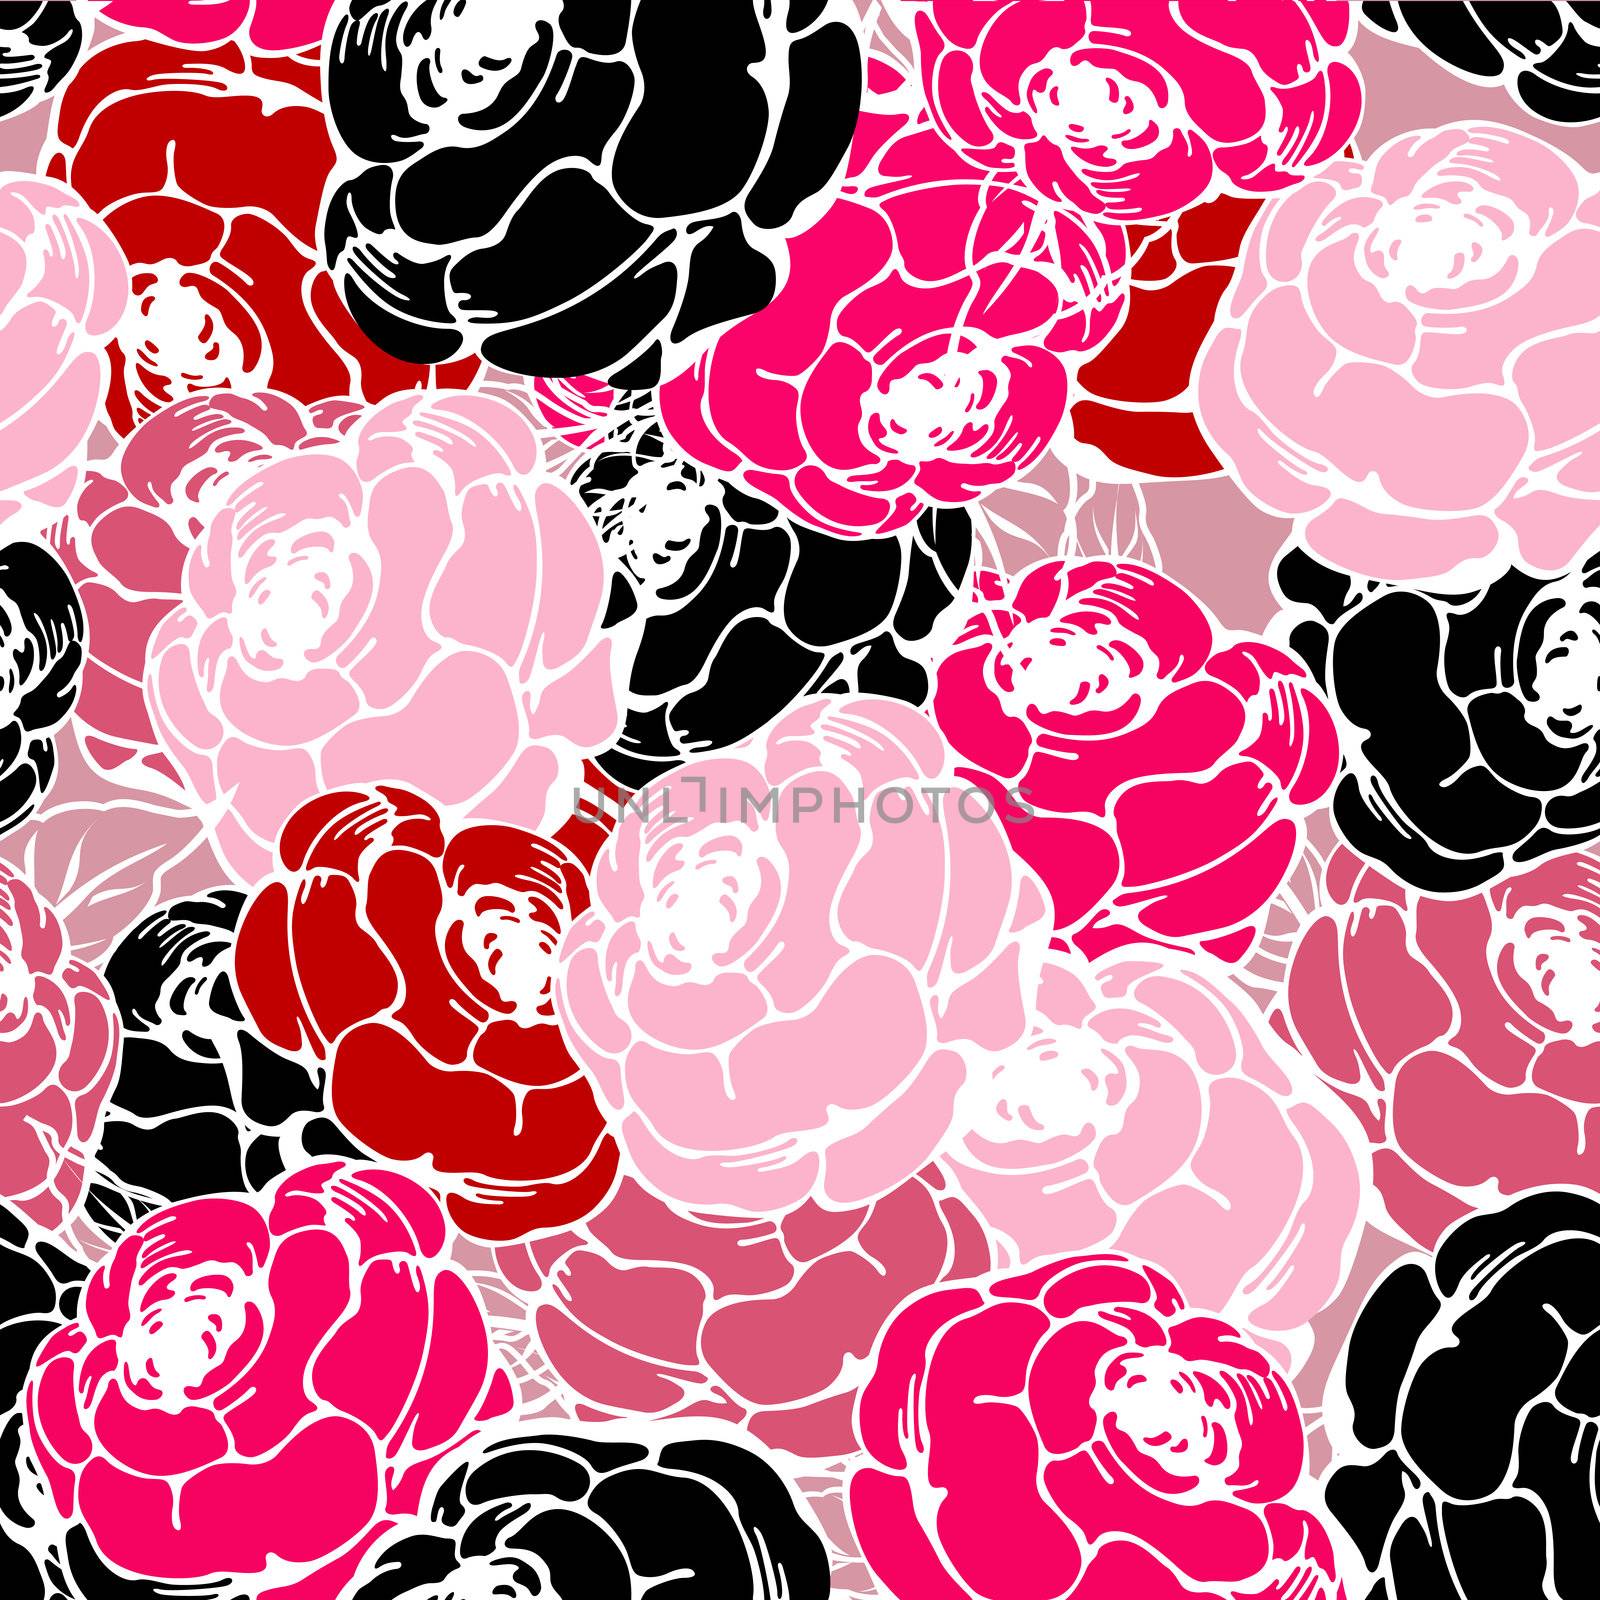 Pink roses pattern by Lirch